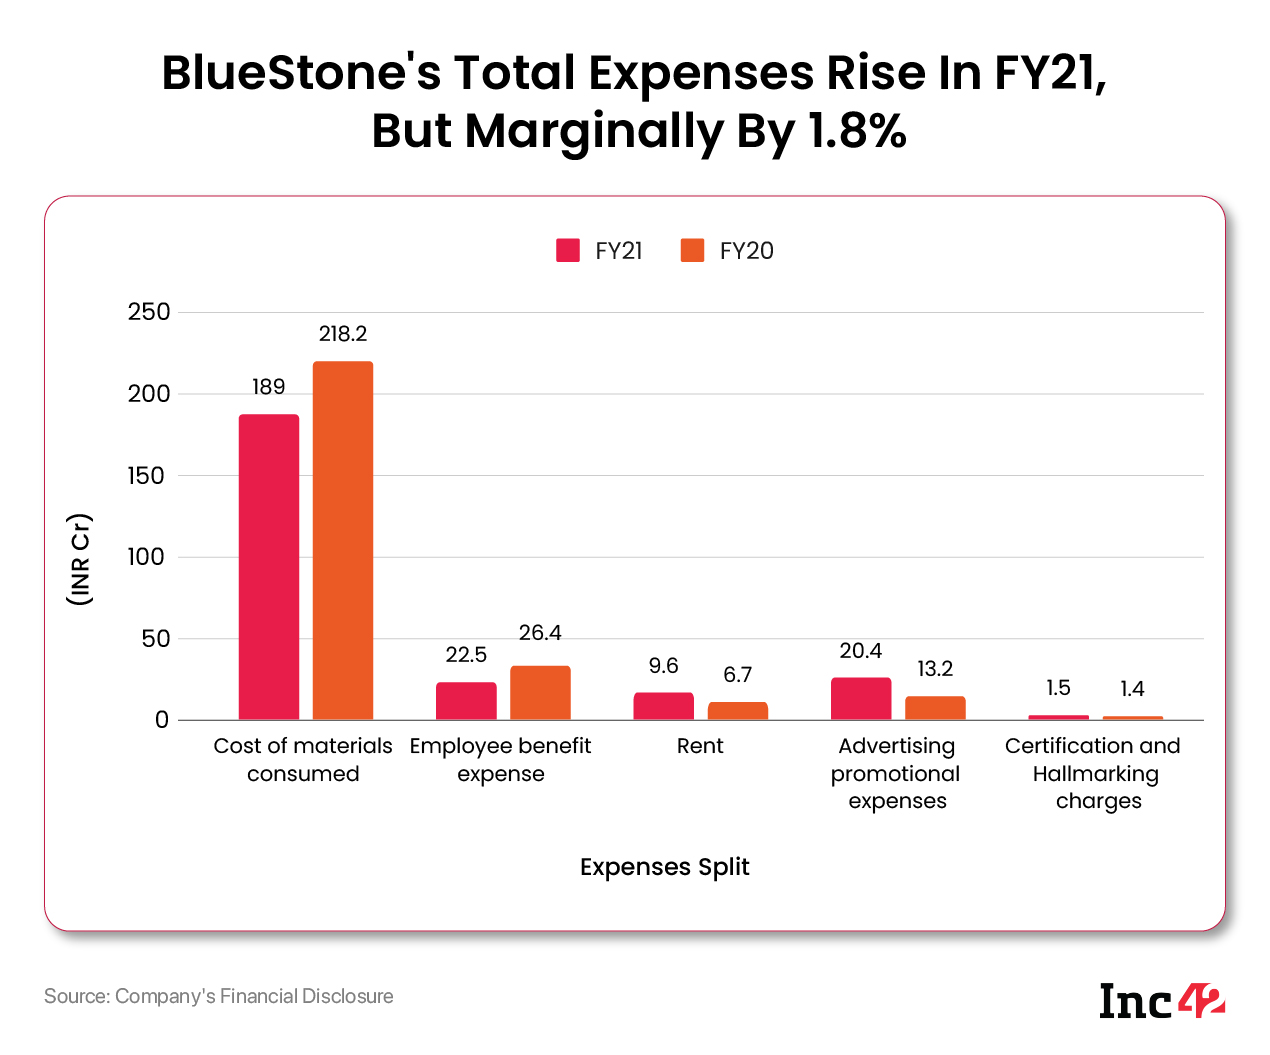 BlueStone's Total Expenses Rise In FY21, But Marginally By 1.8%